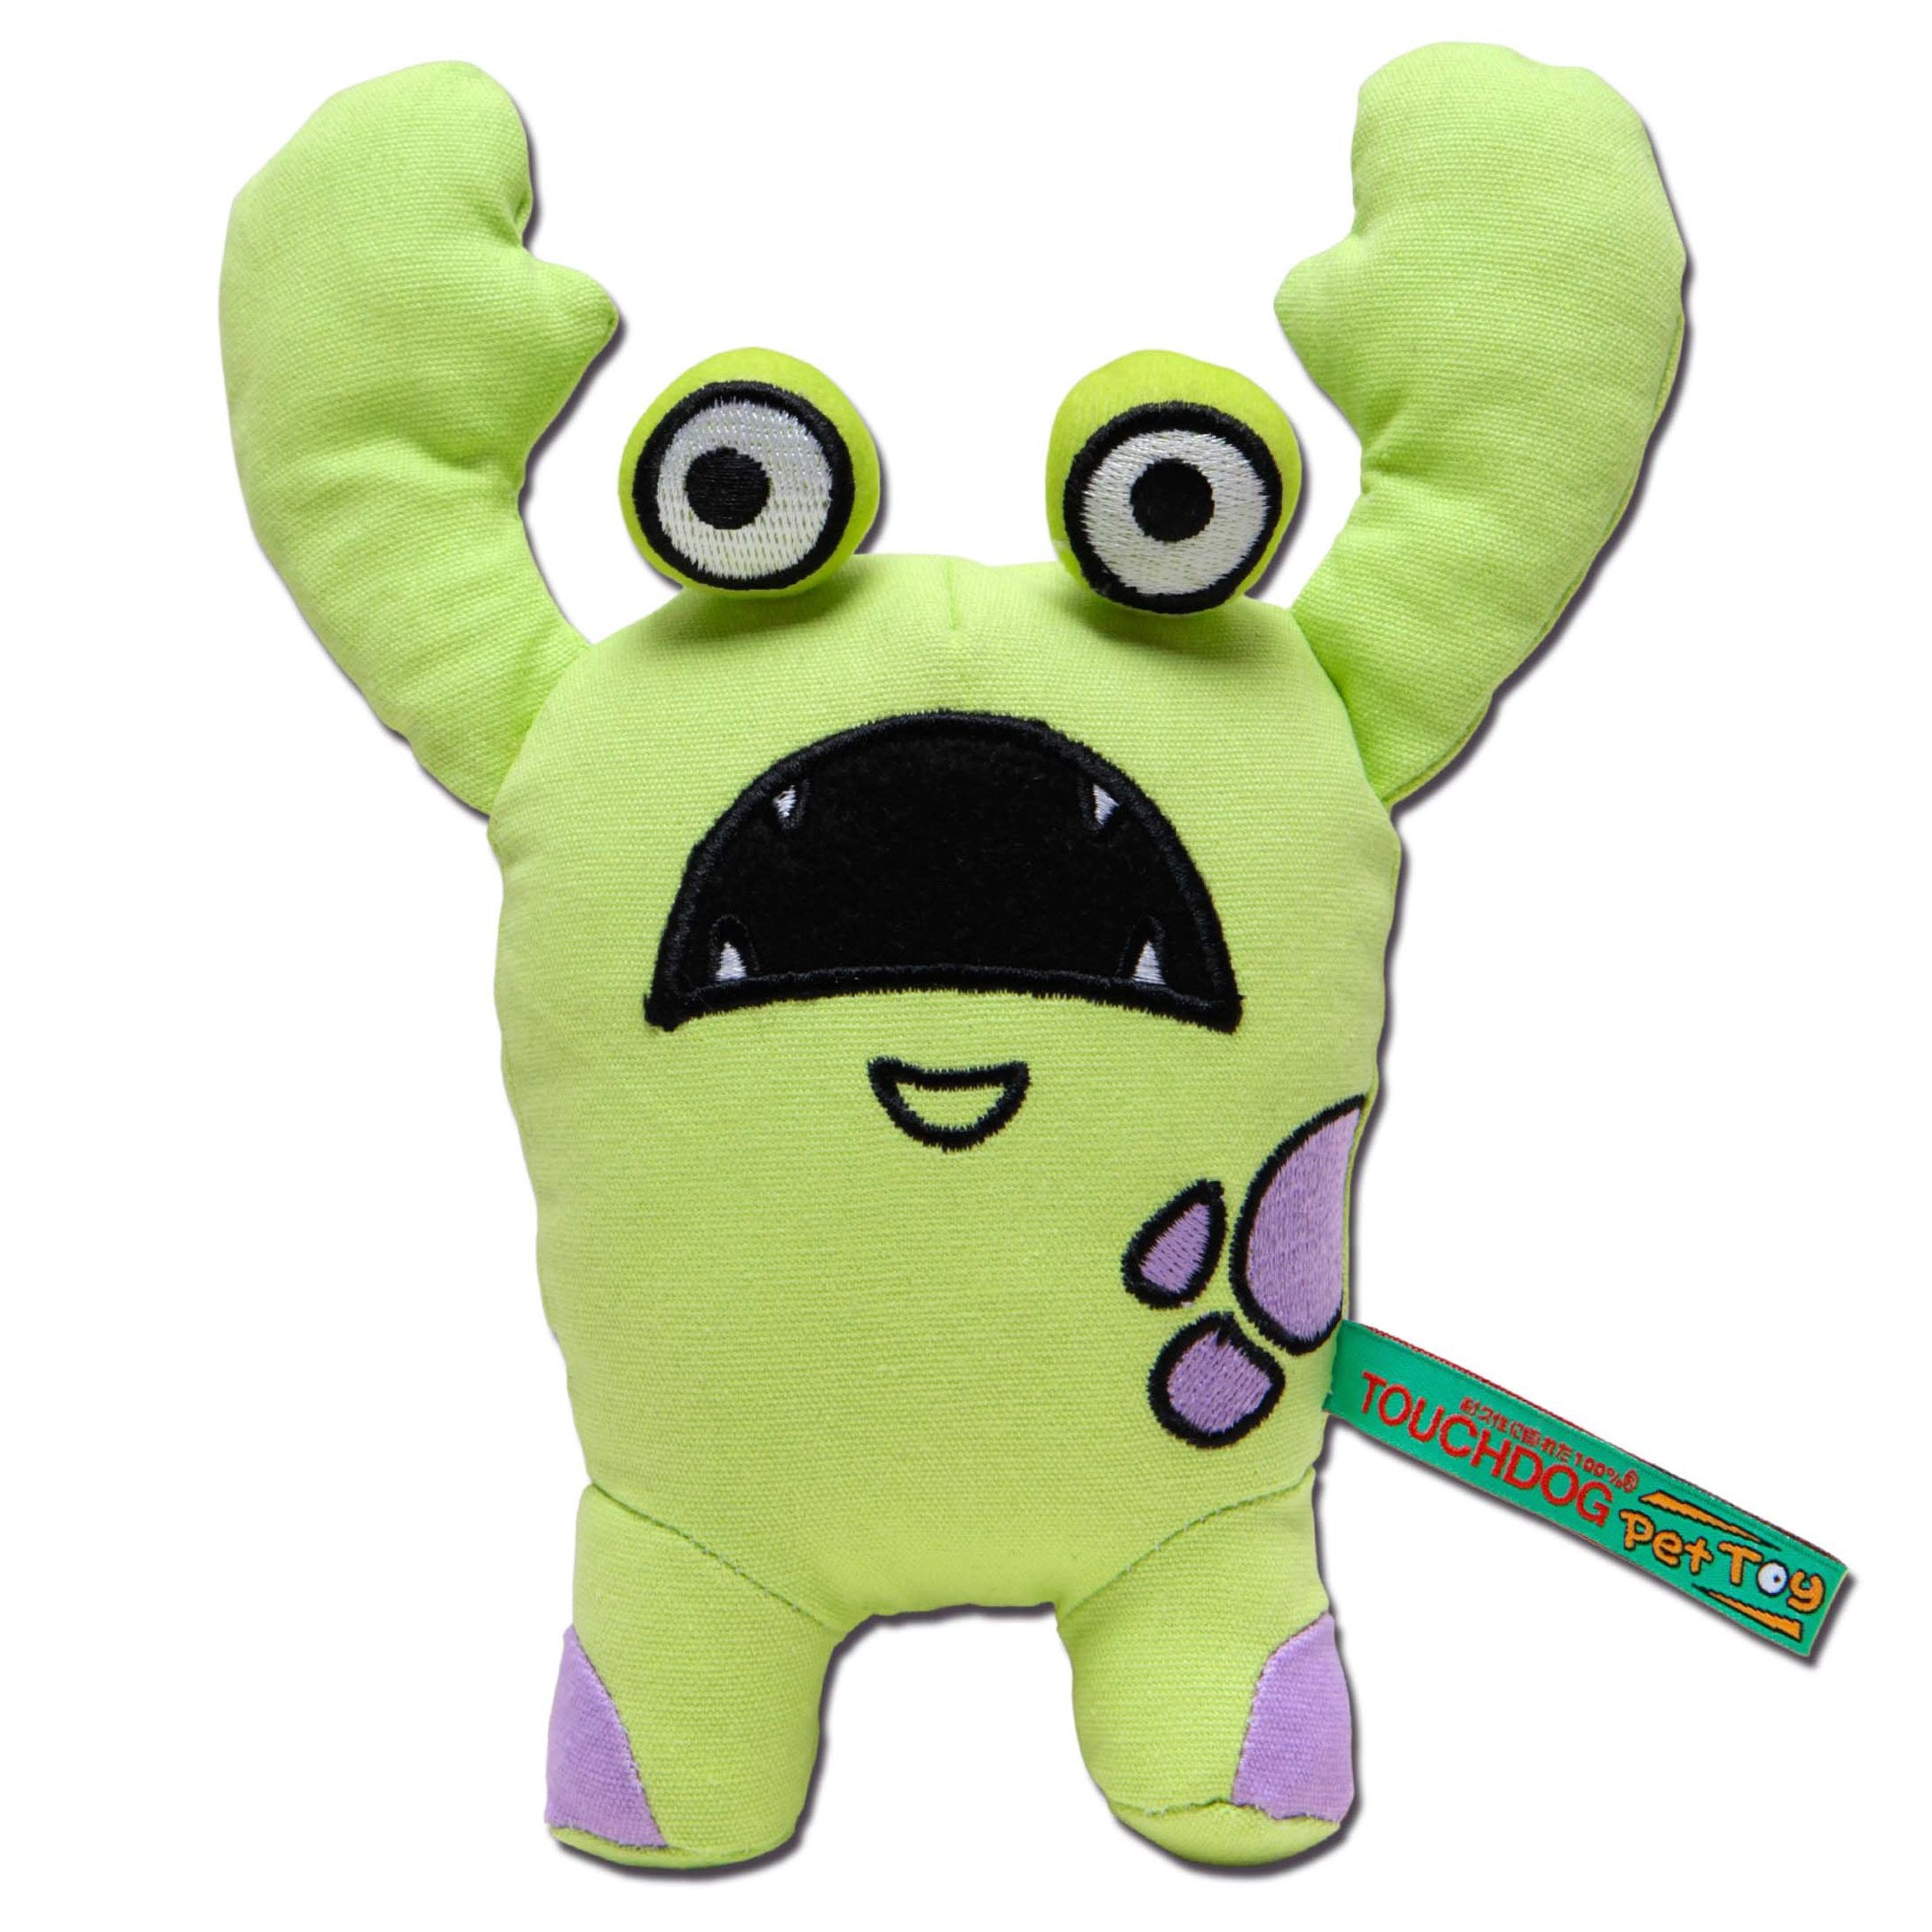 Touchdog Cartoon Up-for-Crabs Plush Dog Toy - Green